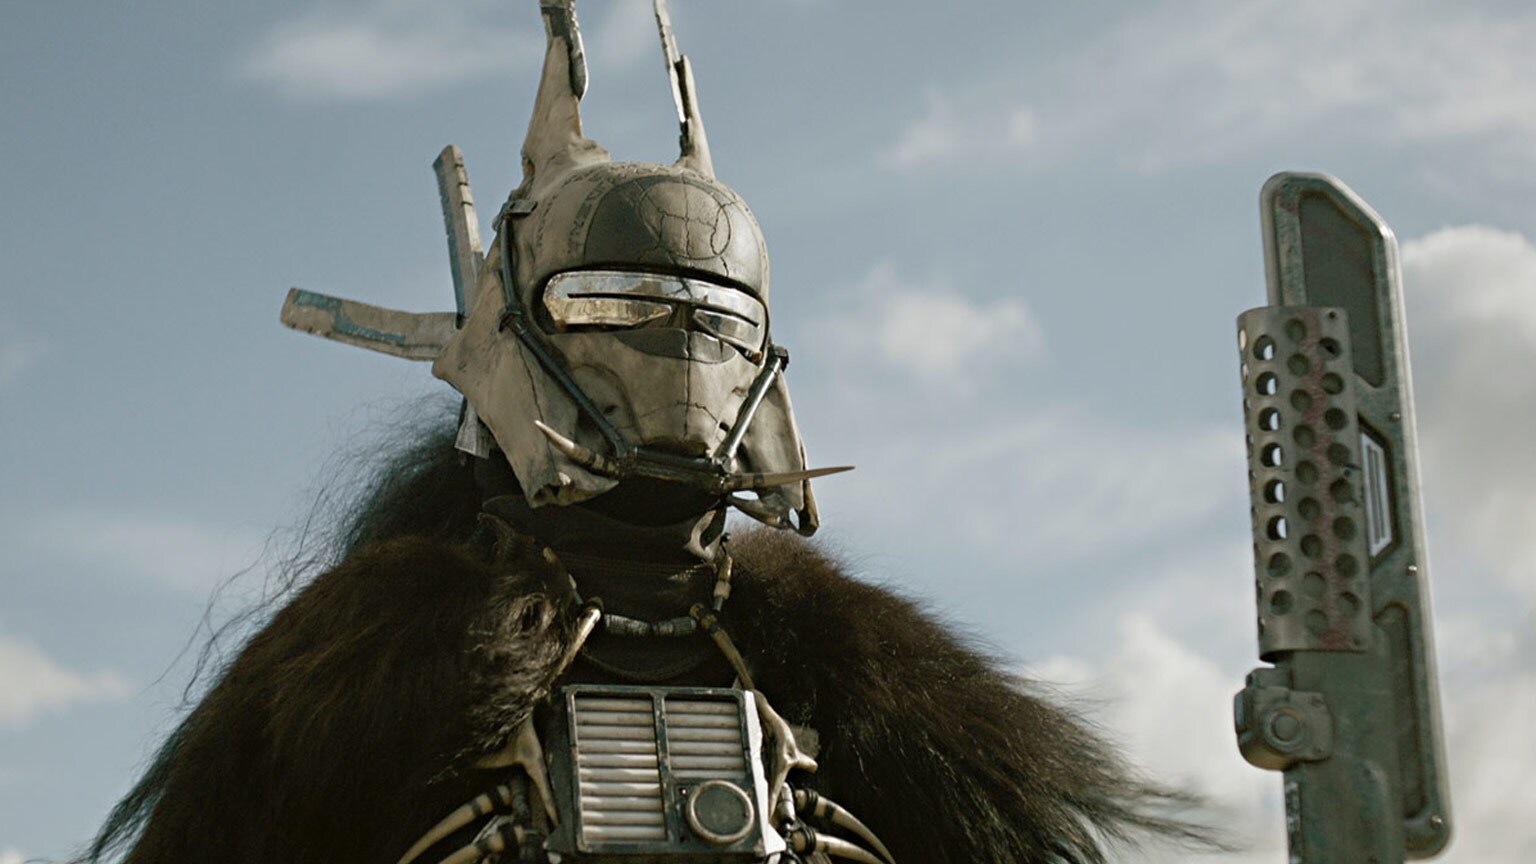 Latest Look at Solo: Meet Enfys Nest, See Qi'ra in Action, and More!